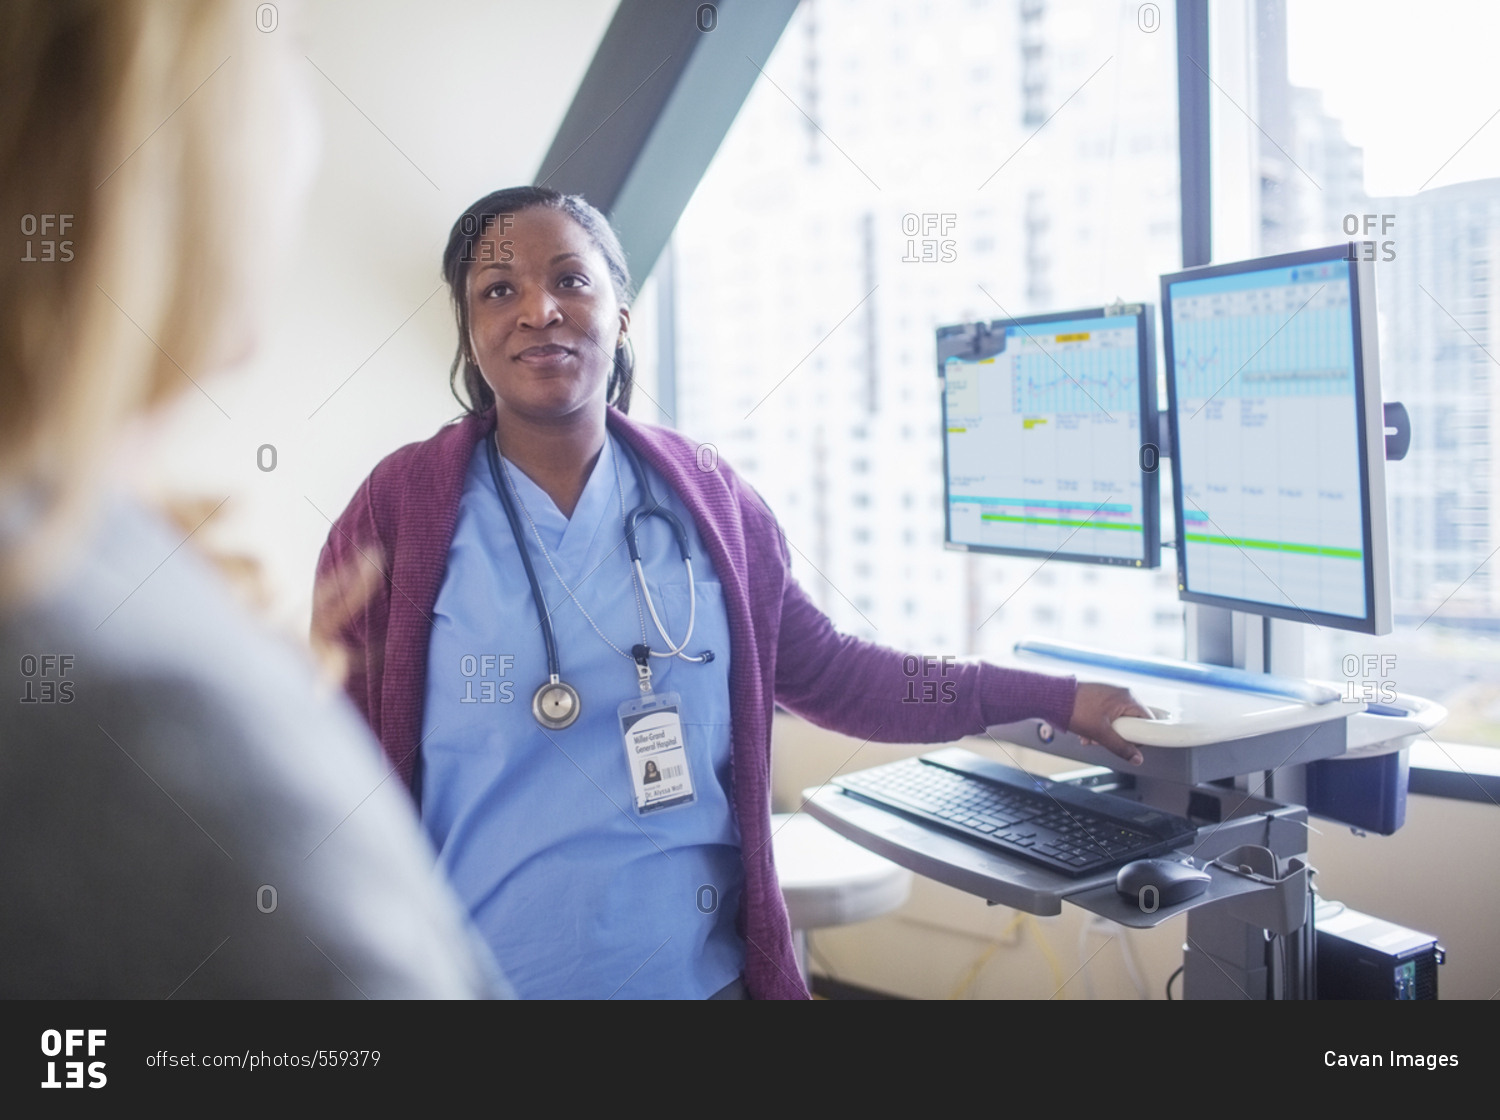 Female doctor looking at patient while standing by desktop computers in medical room